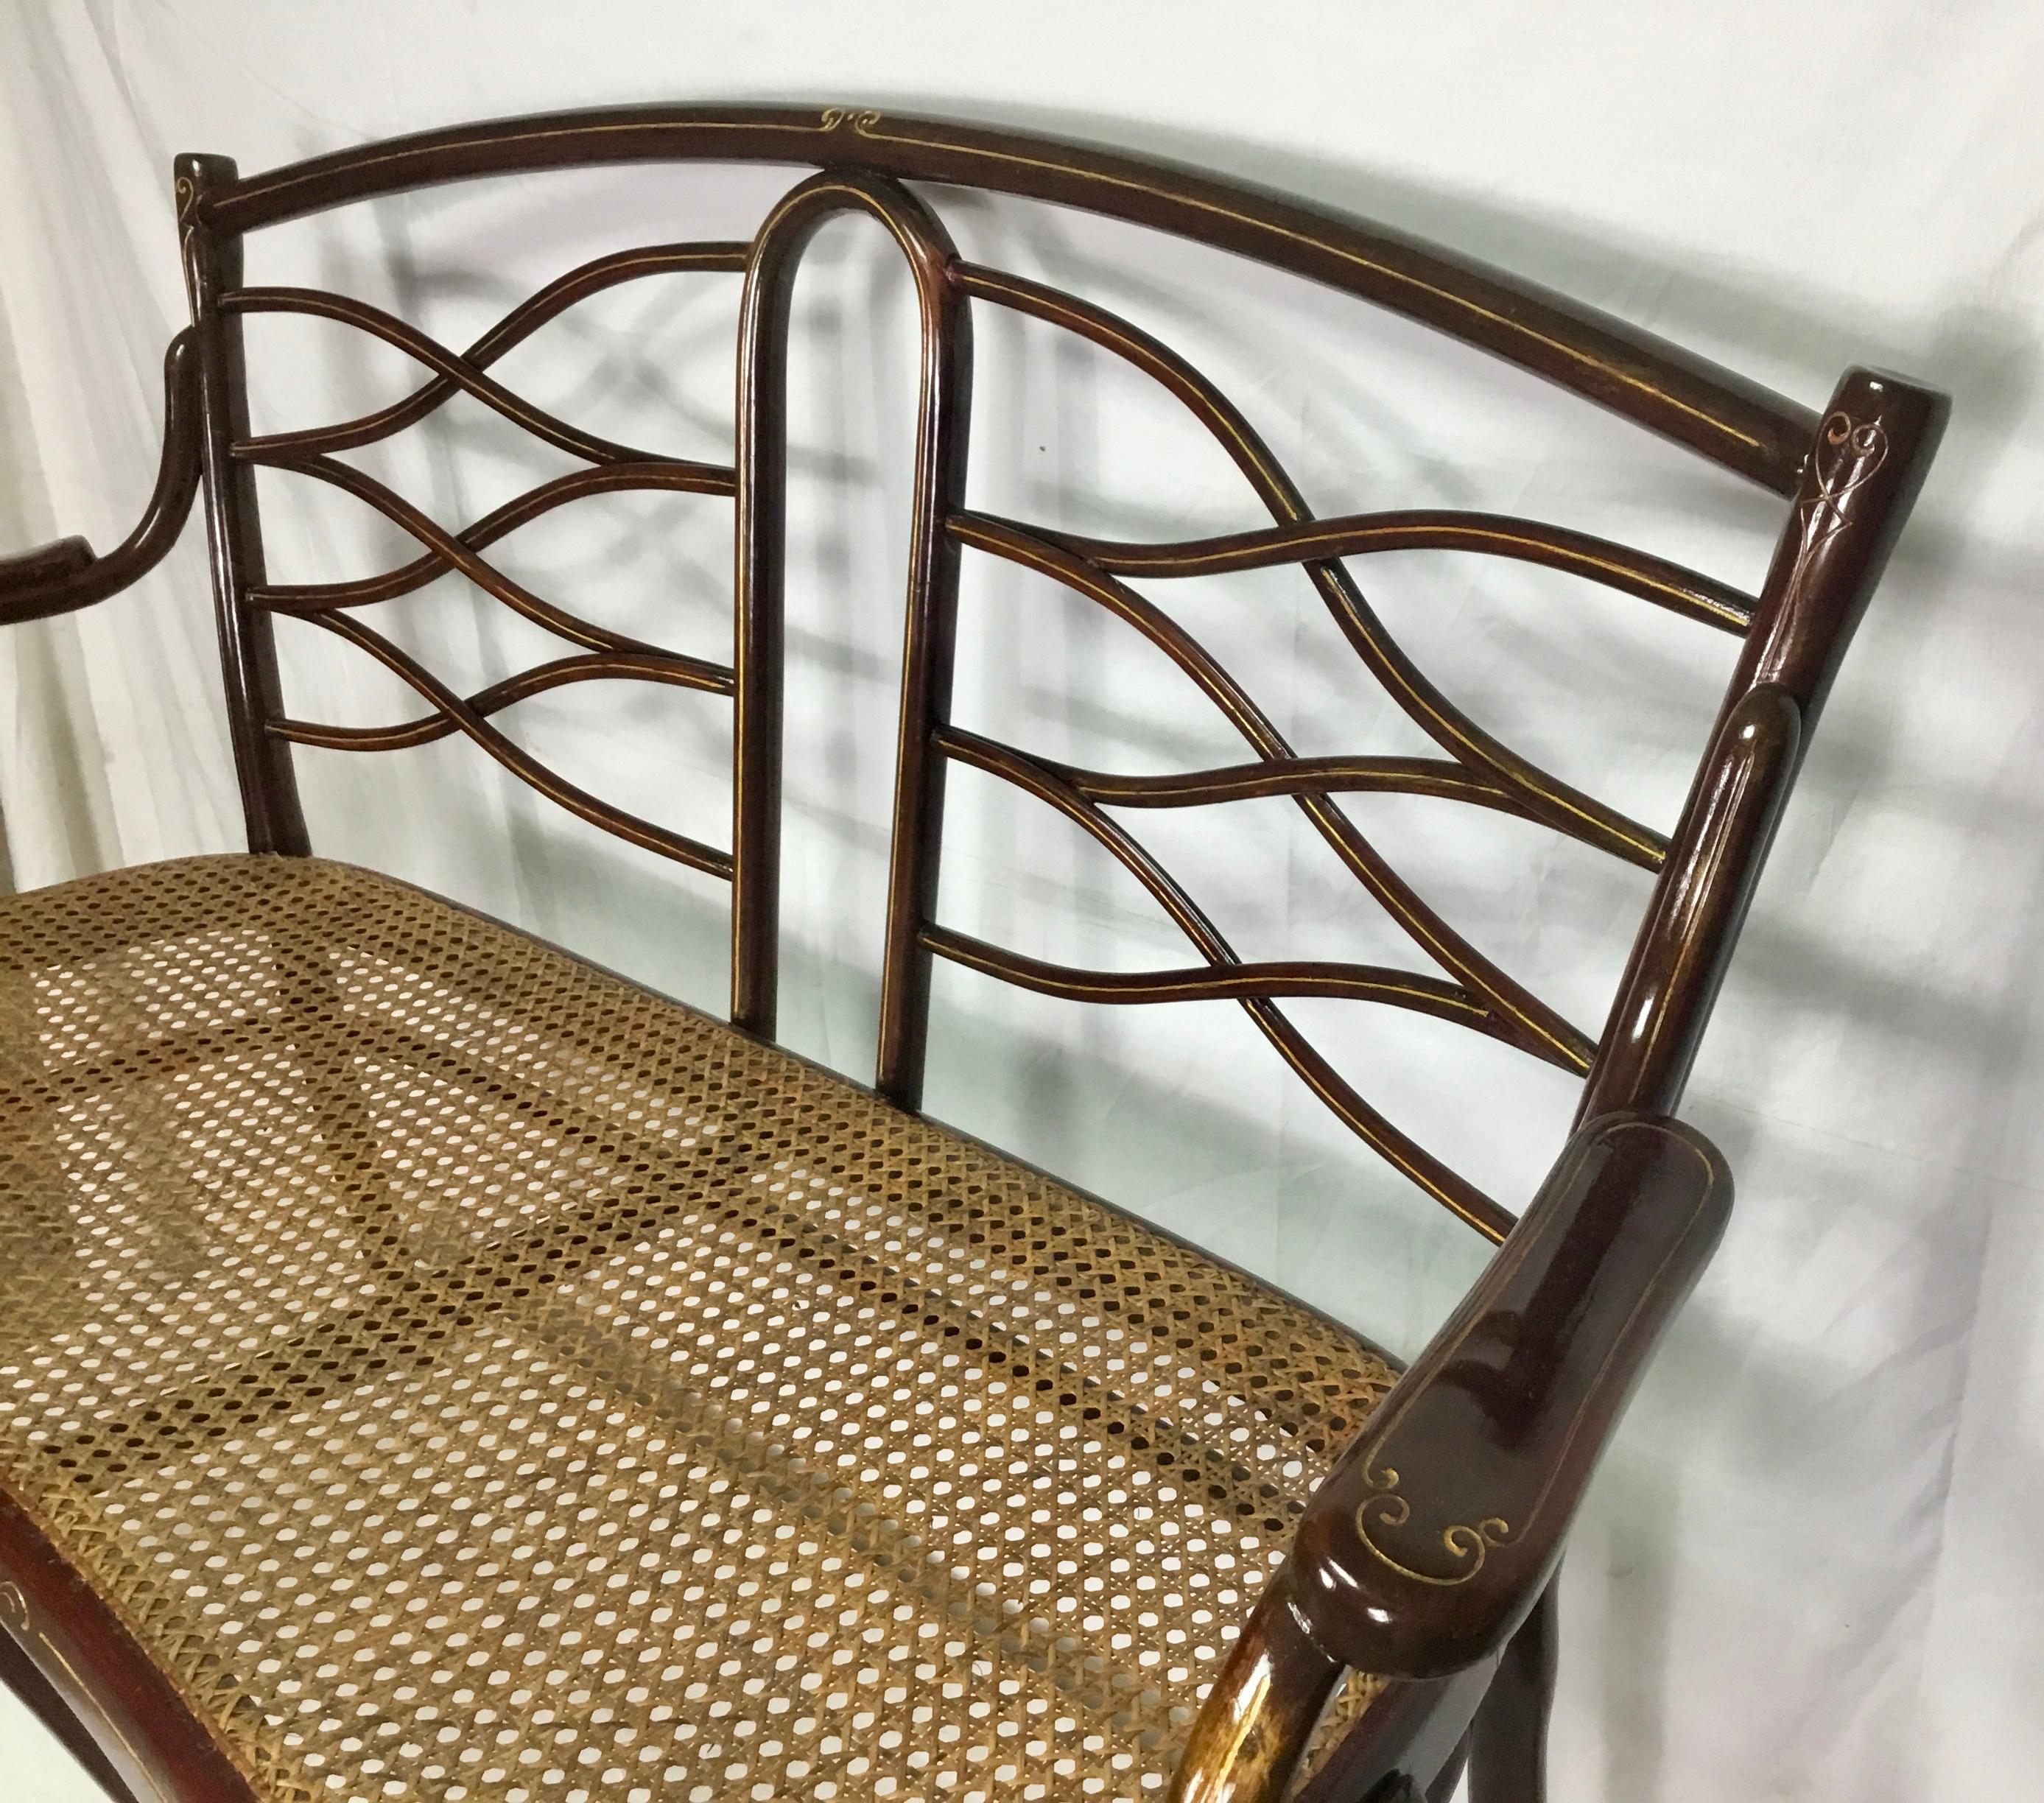 Rattan Banquette in bentwood and cane by Thonet, Austria, late 19th century